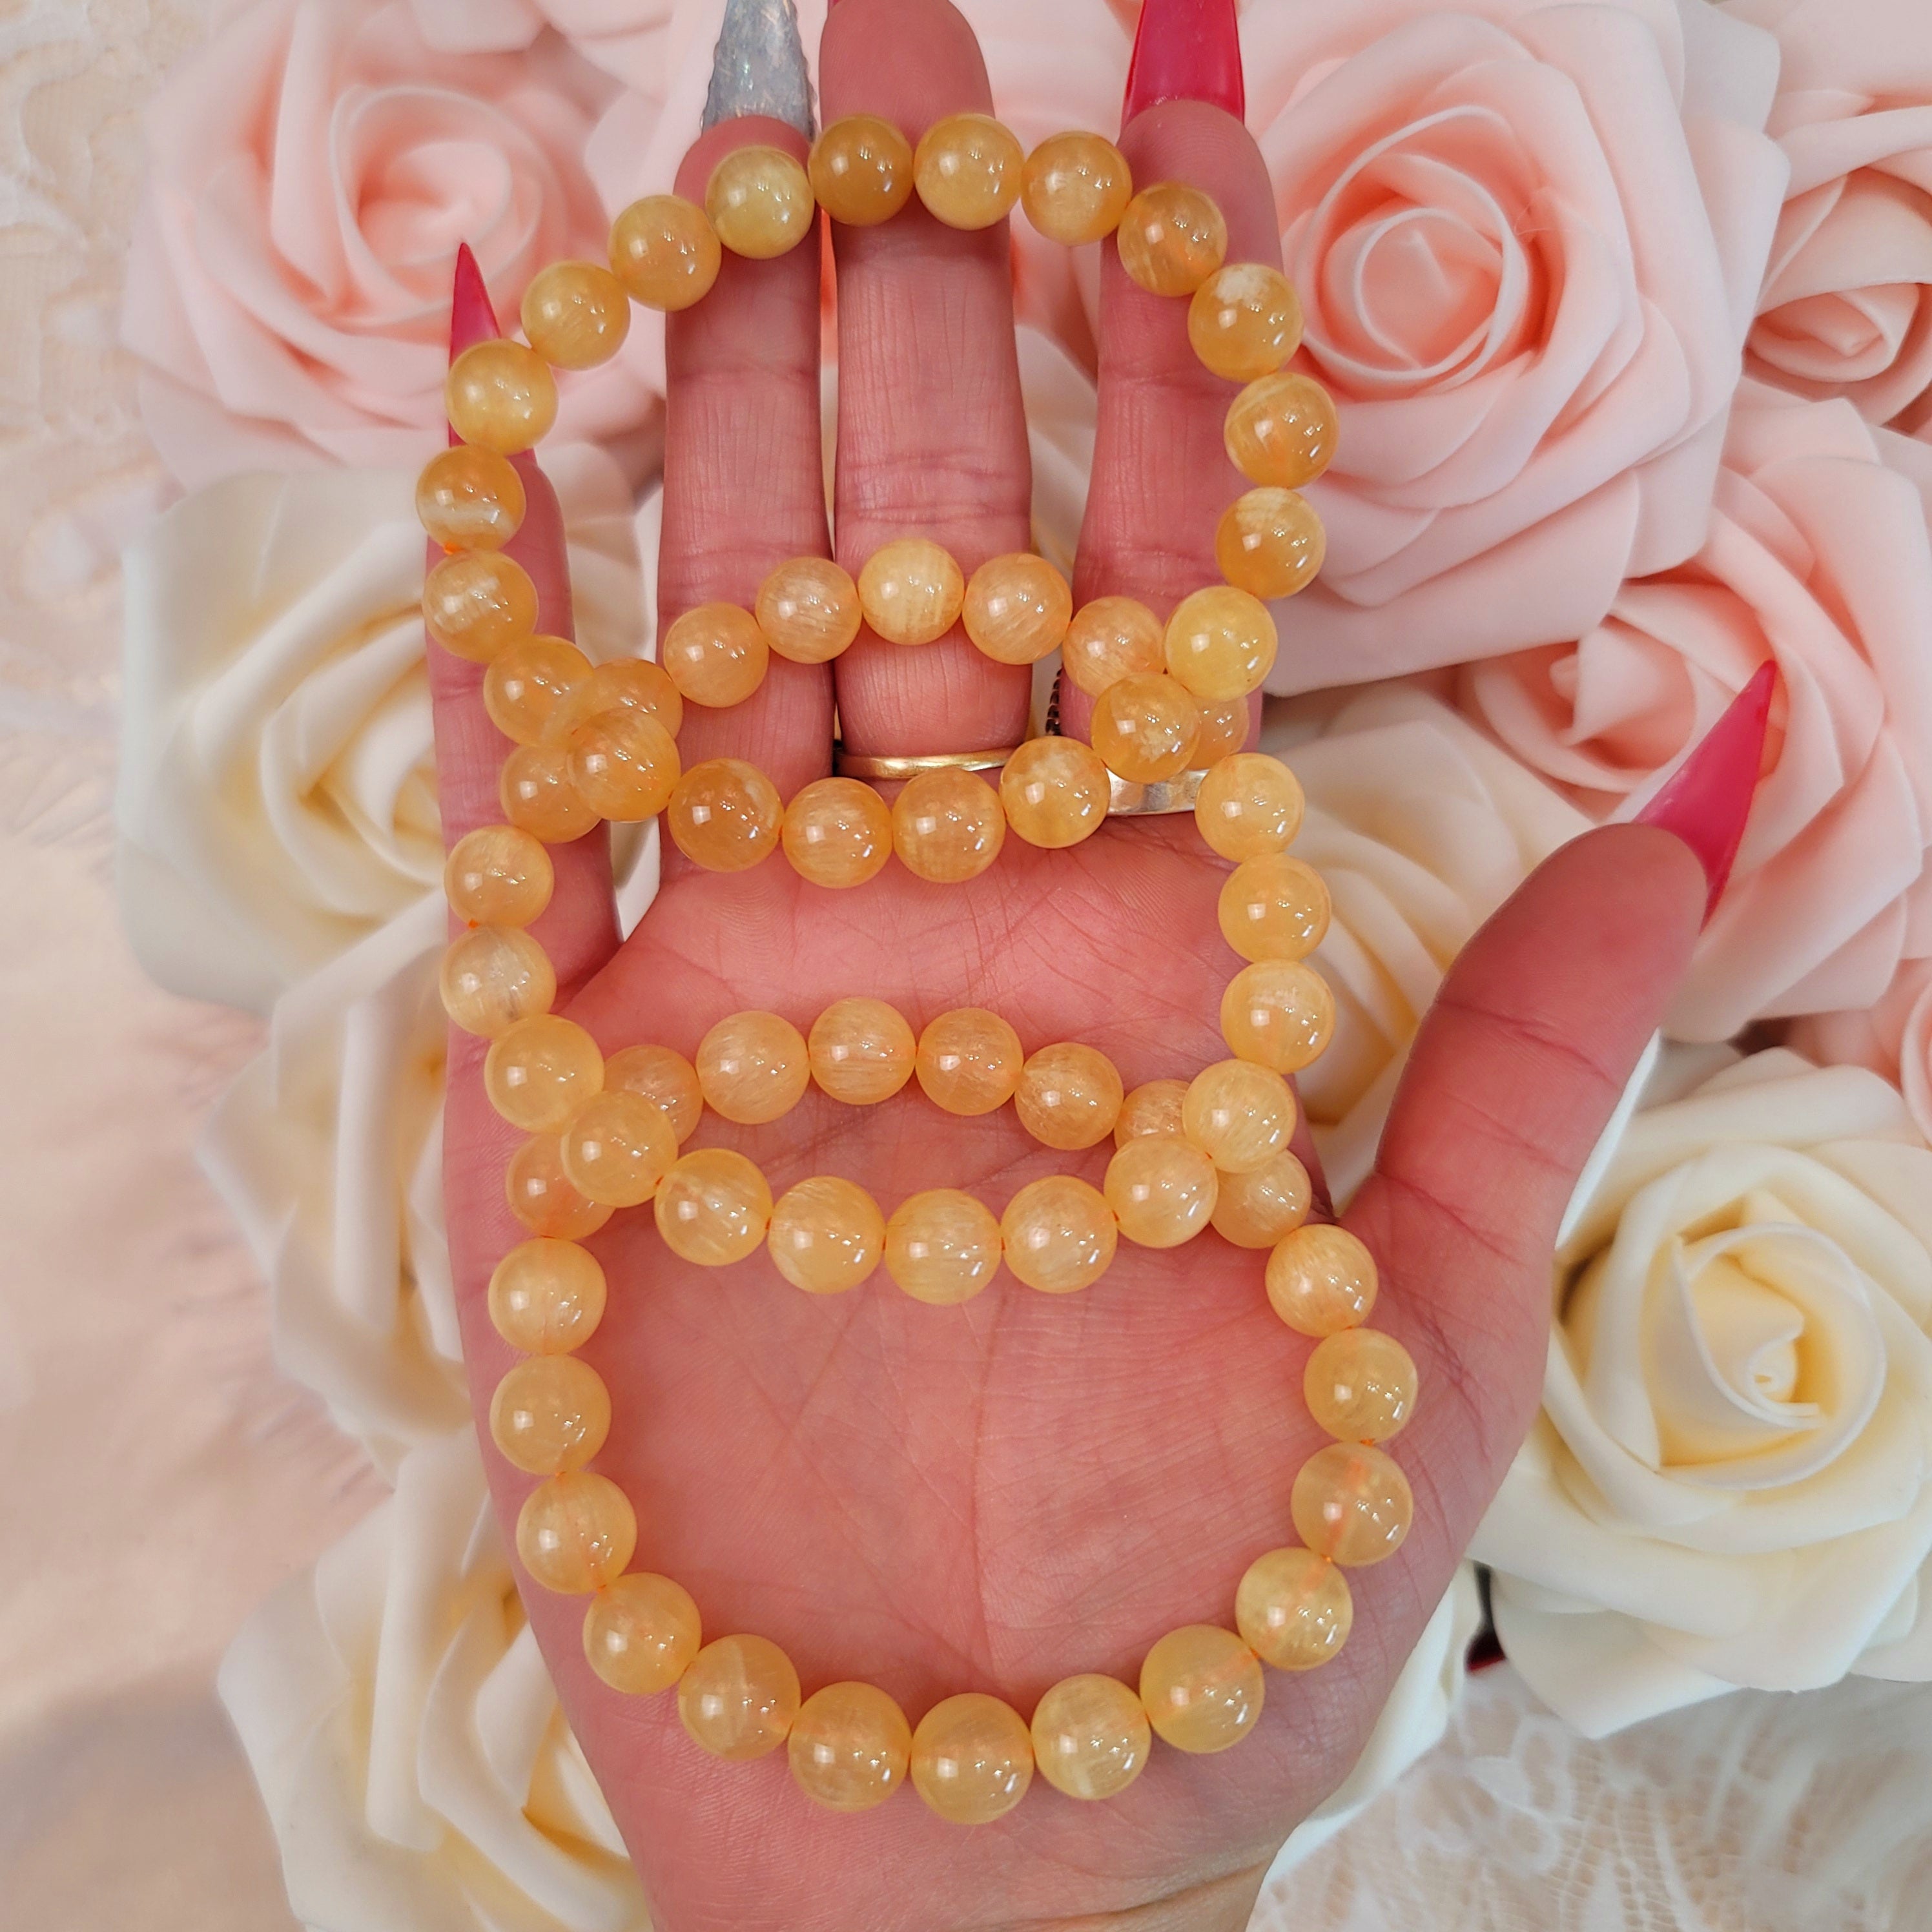 Yellow Calcite Bracelet (High Quality) for Boosting Self-Confidence, Stress Relief and Optimism